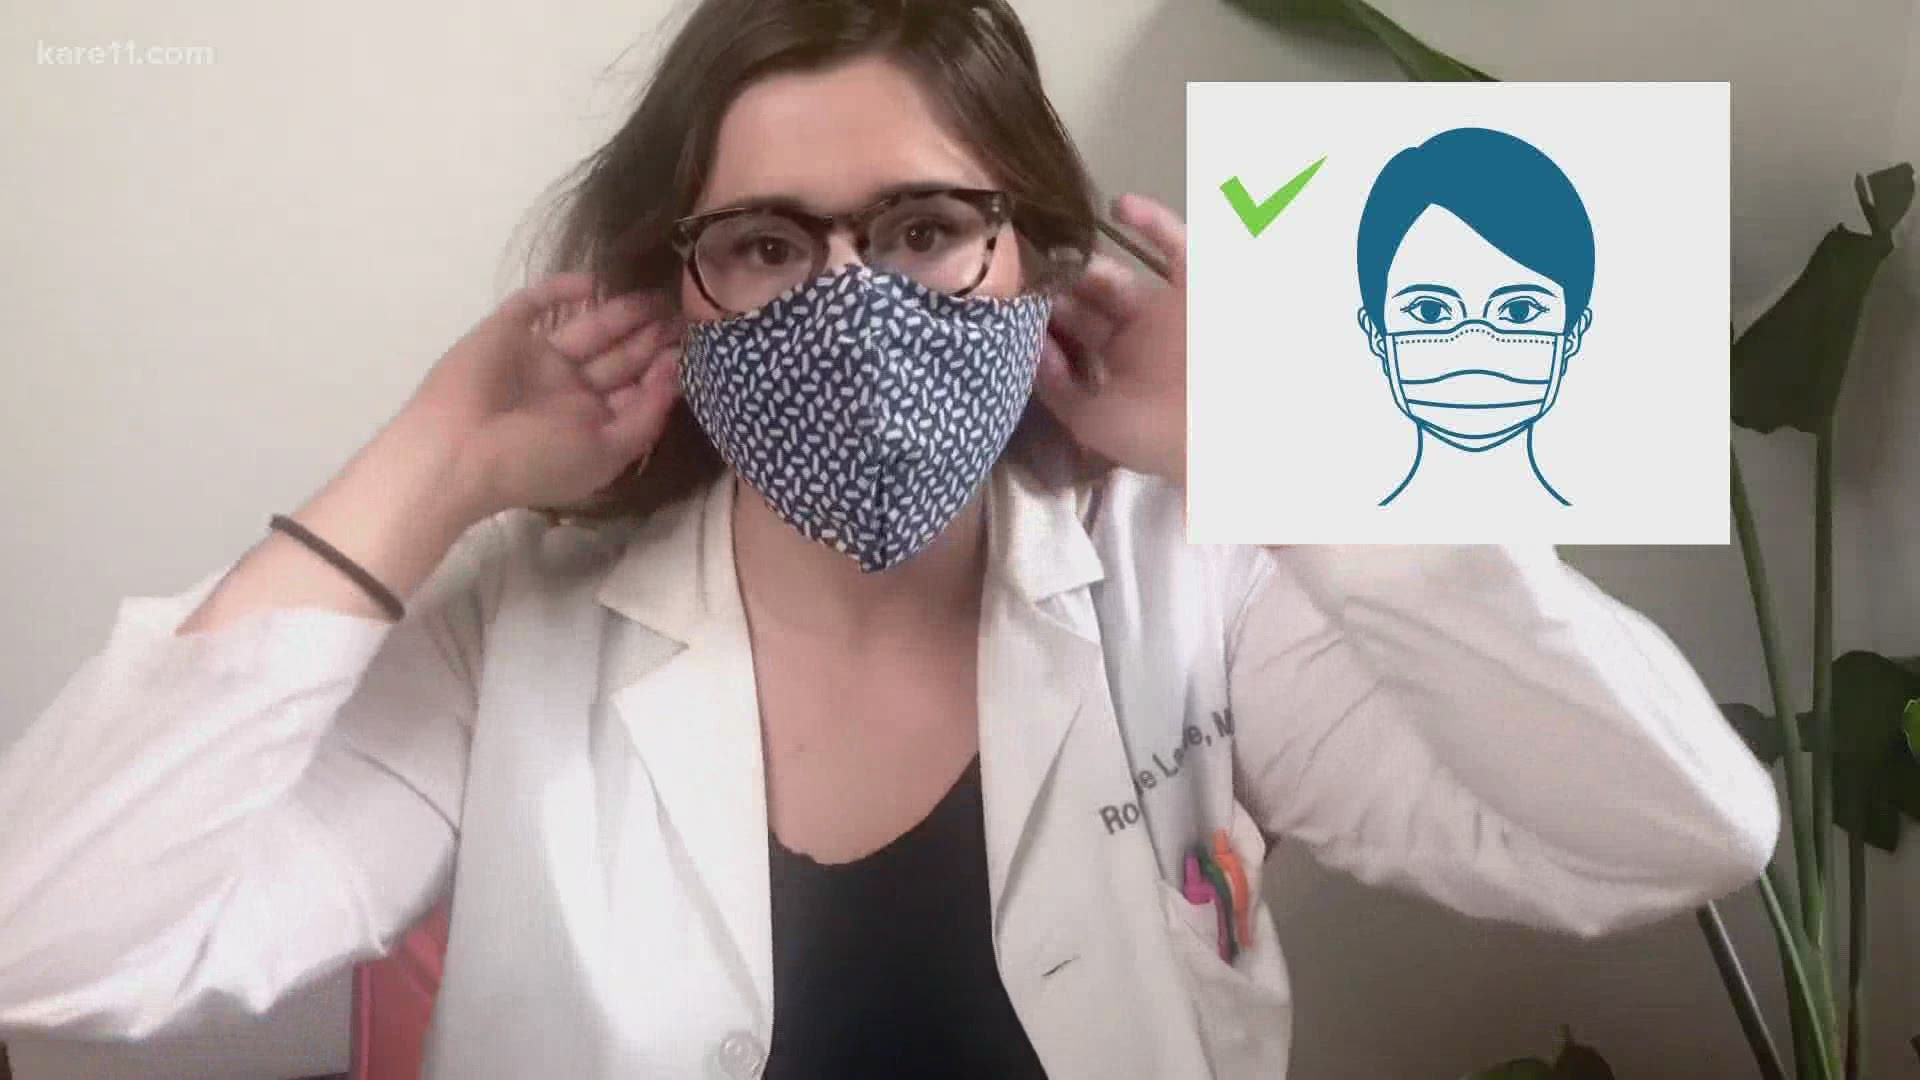 Kids hate wearing masks? TikTok Doc Dr. Leslie shares her tips for making mask wearing fun and comfortable as students head back to school.